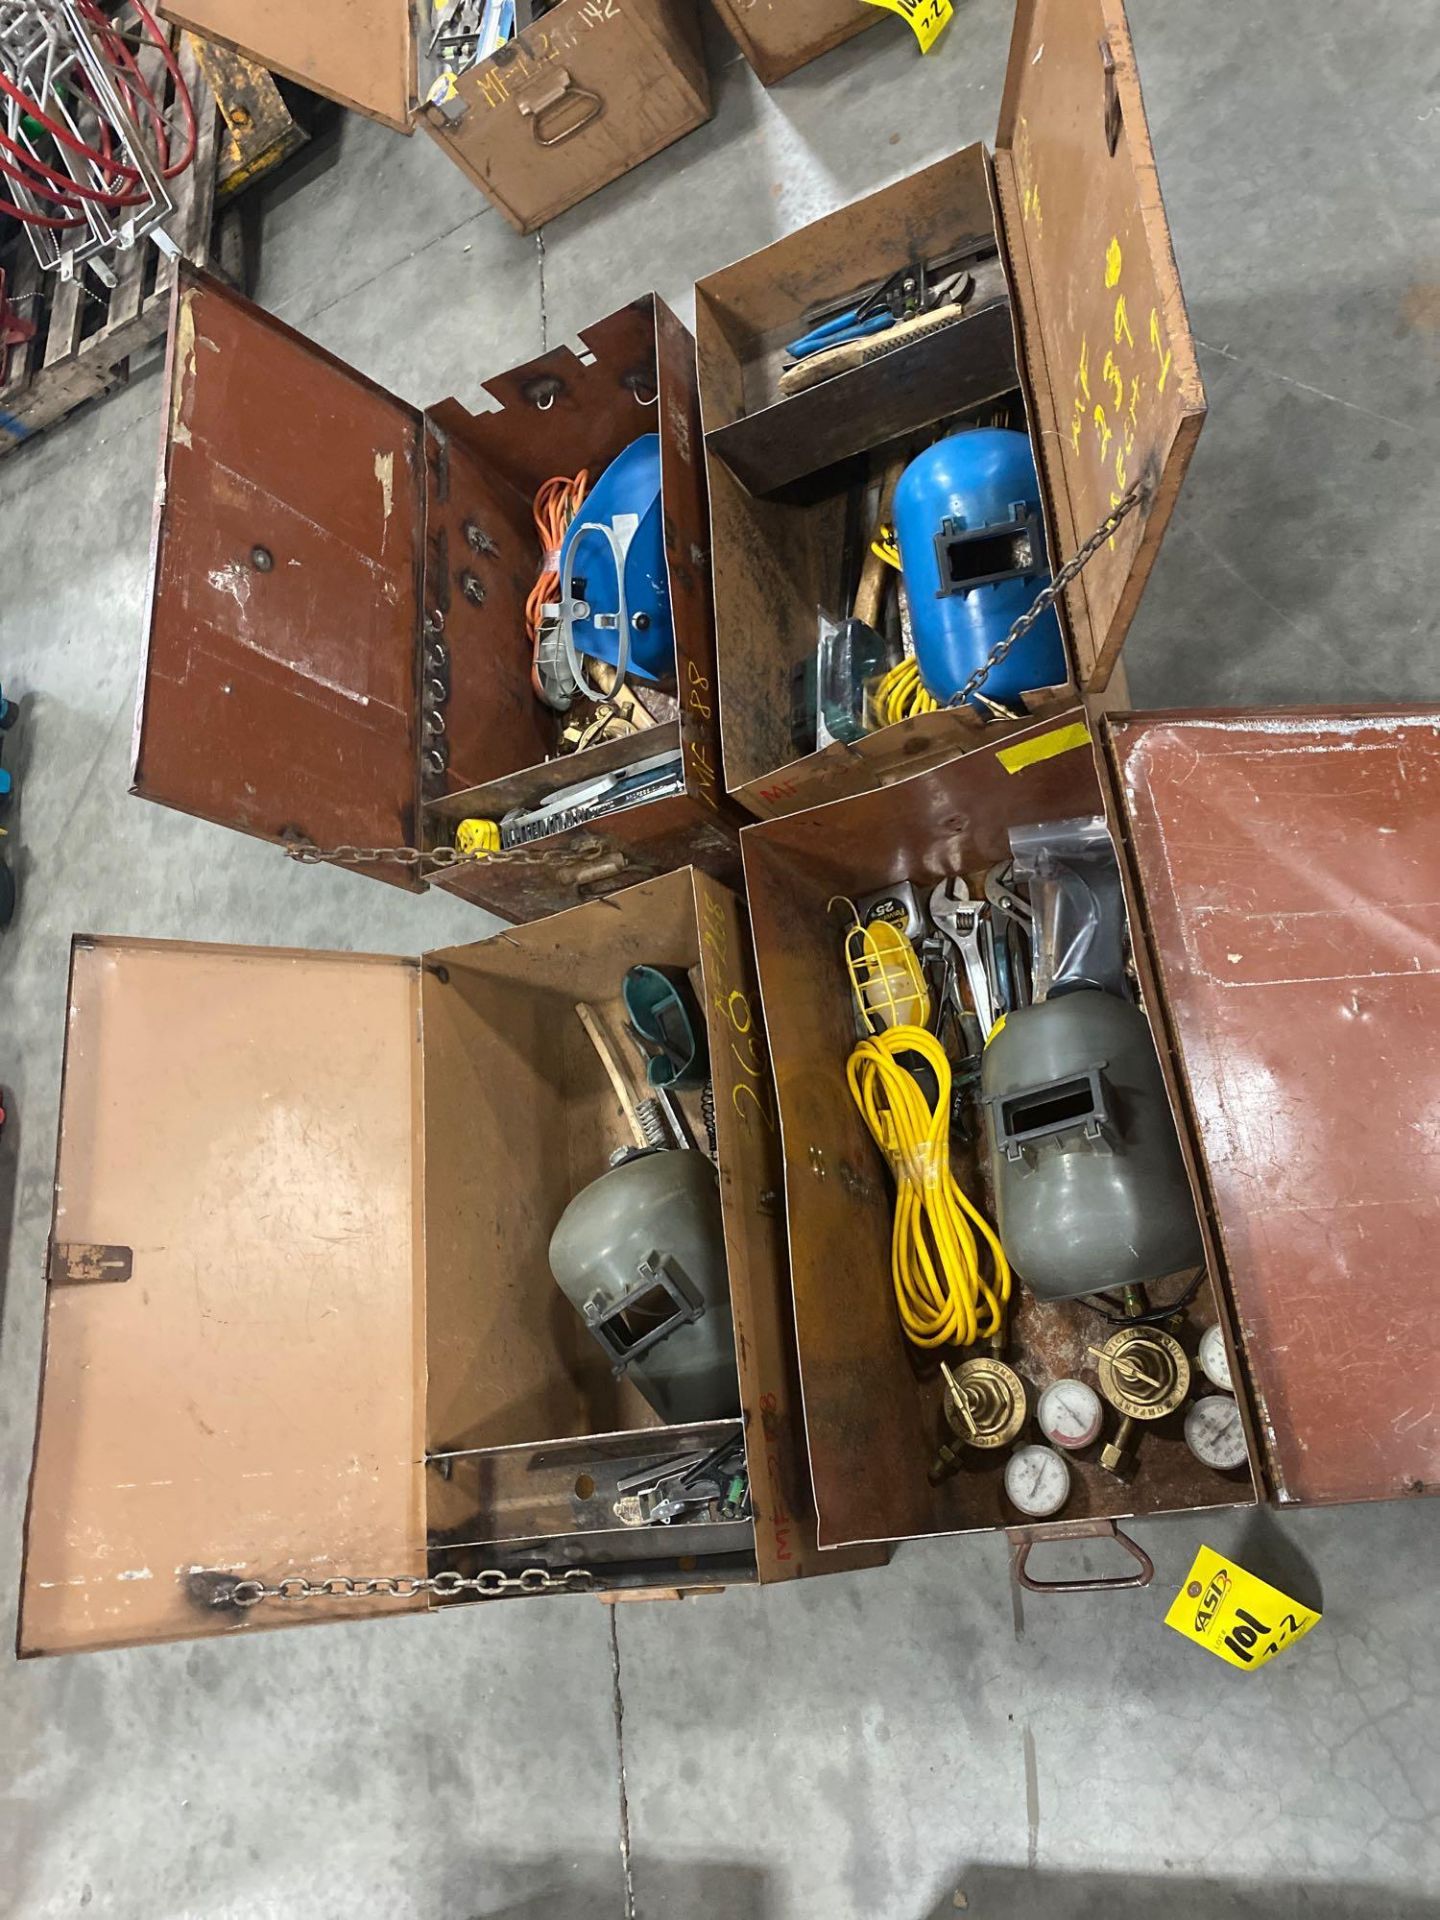 FOUR KNAACK TOOL BOXES WITH CONTENTS/TOOLS